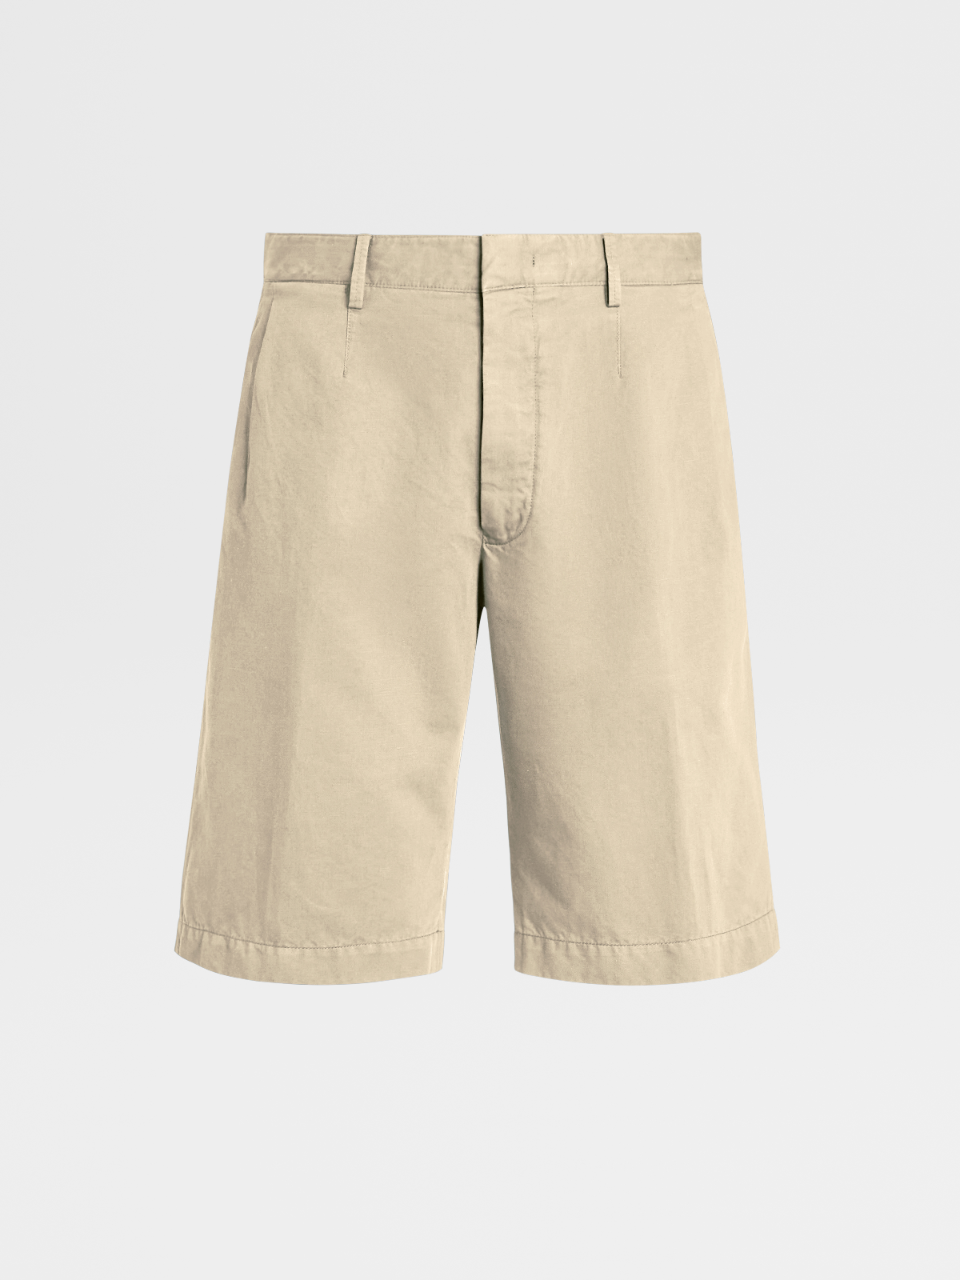 Cotton and Linen Summer Chino Shorts